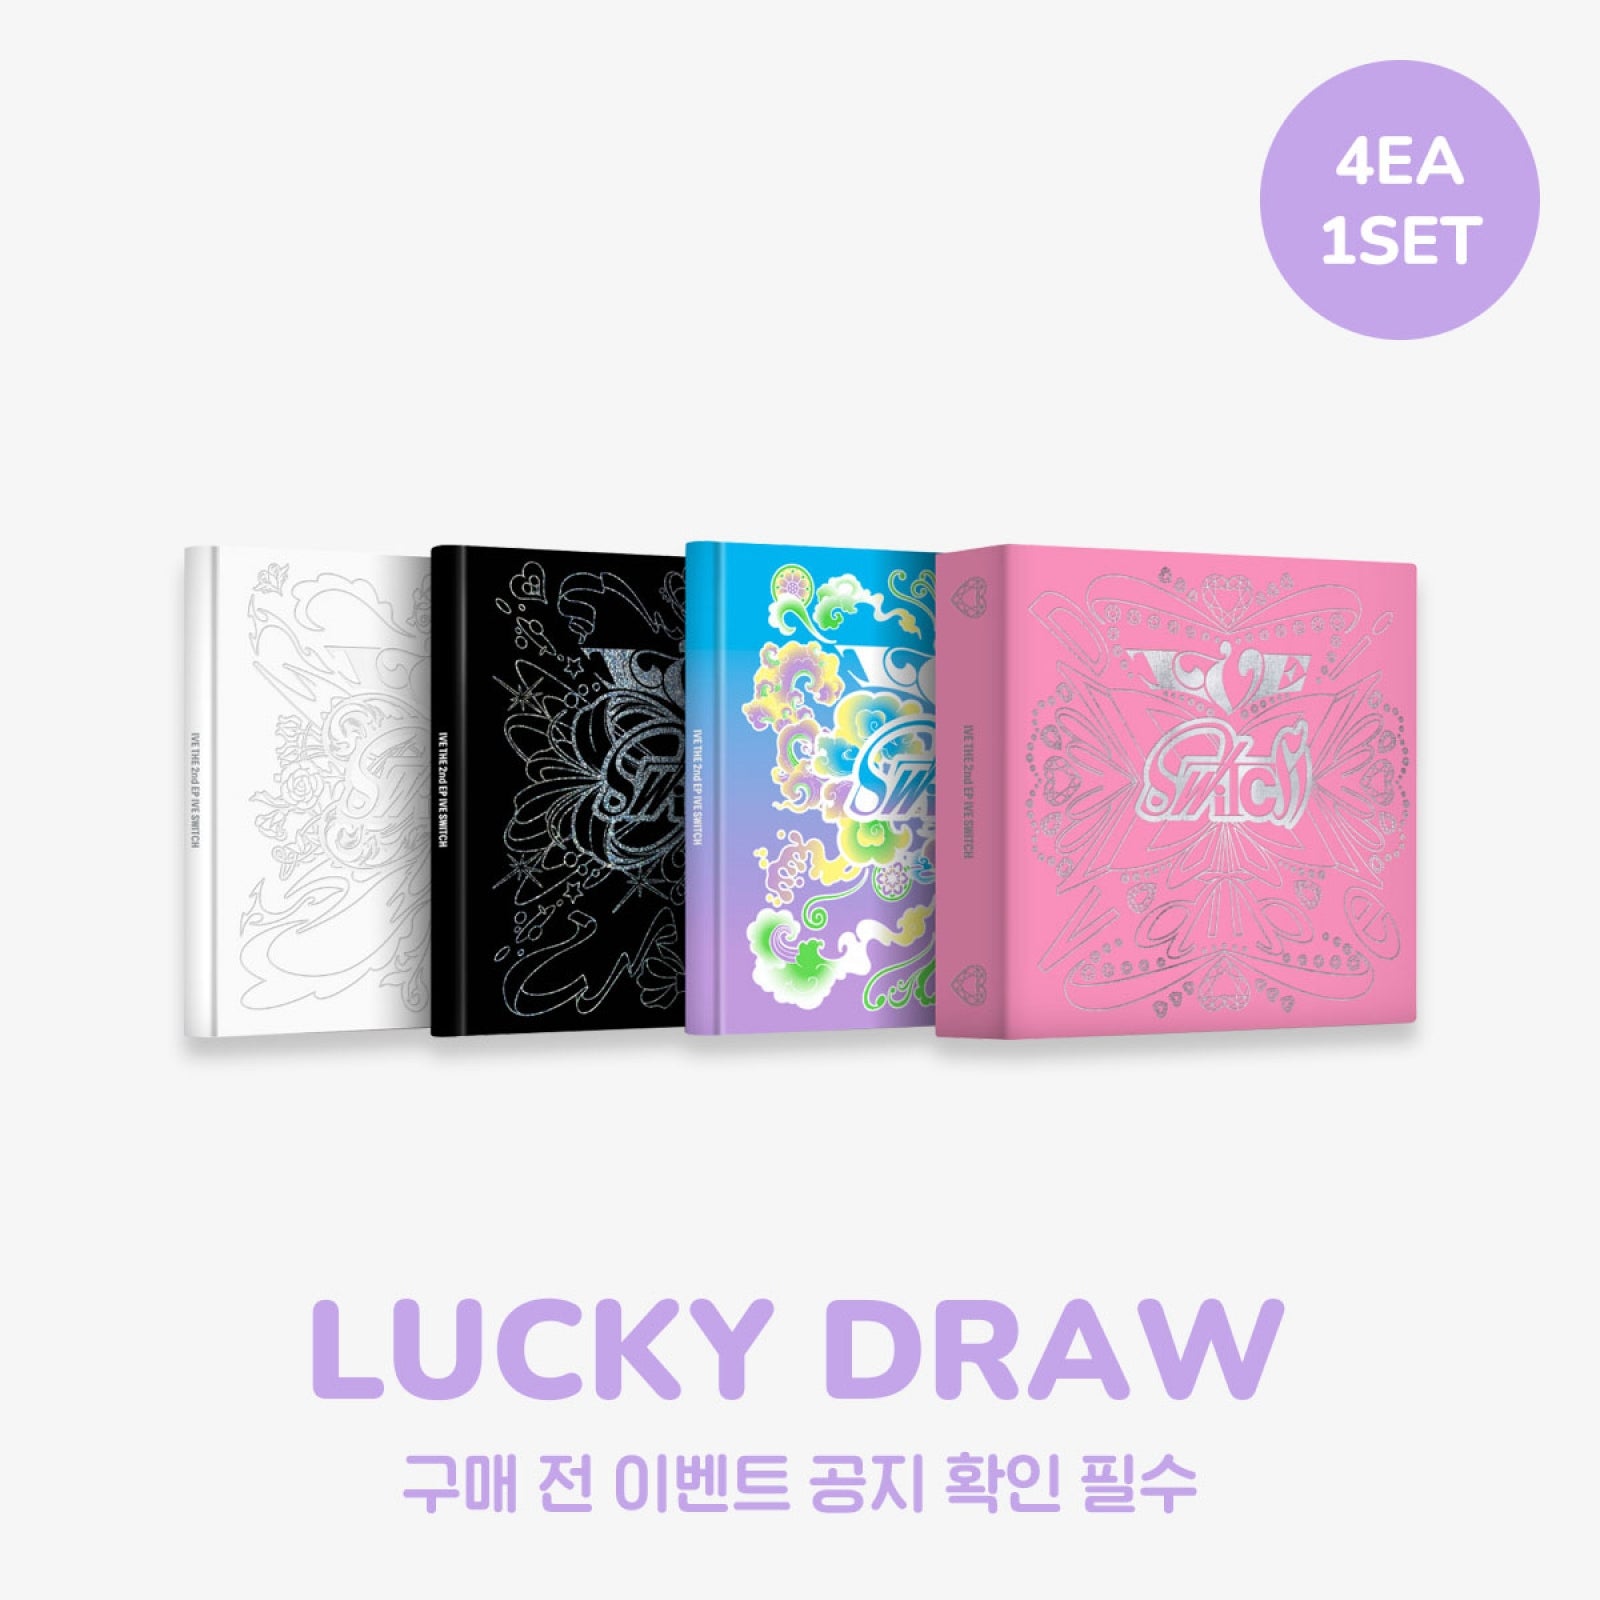 IVE - IVE SWITCH 2ND EP ALBUM LUCKY DRAW EVENT WITHMUU PHOTOBOOK SET - COKODIVE